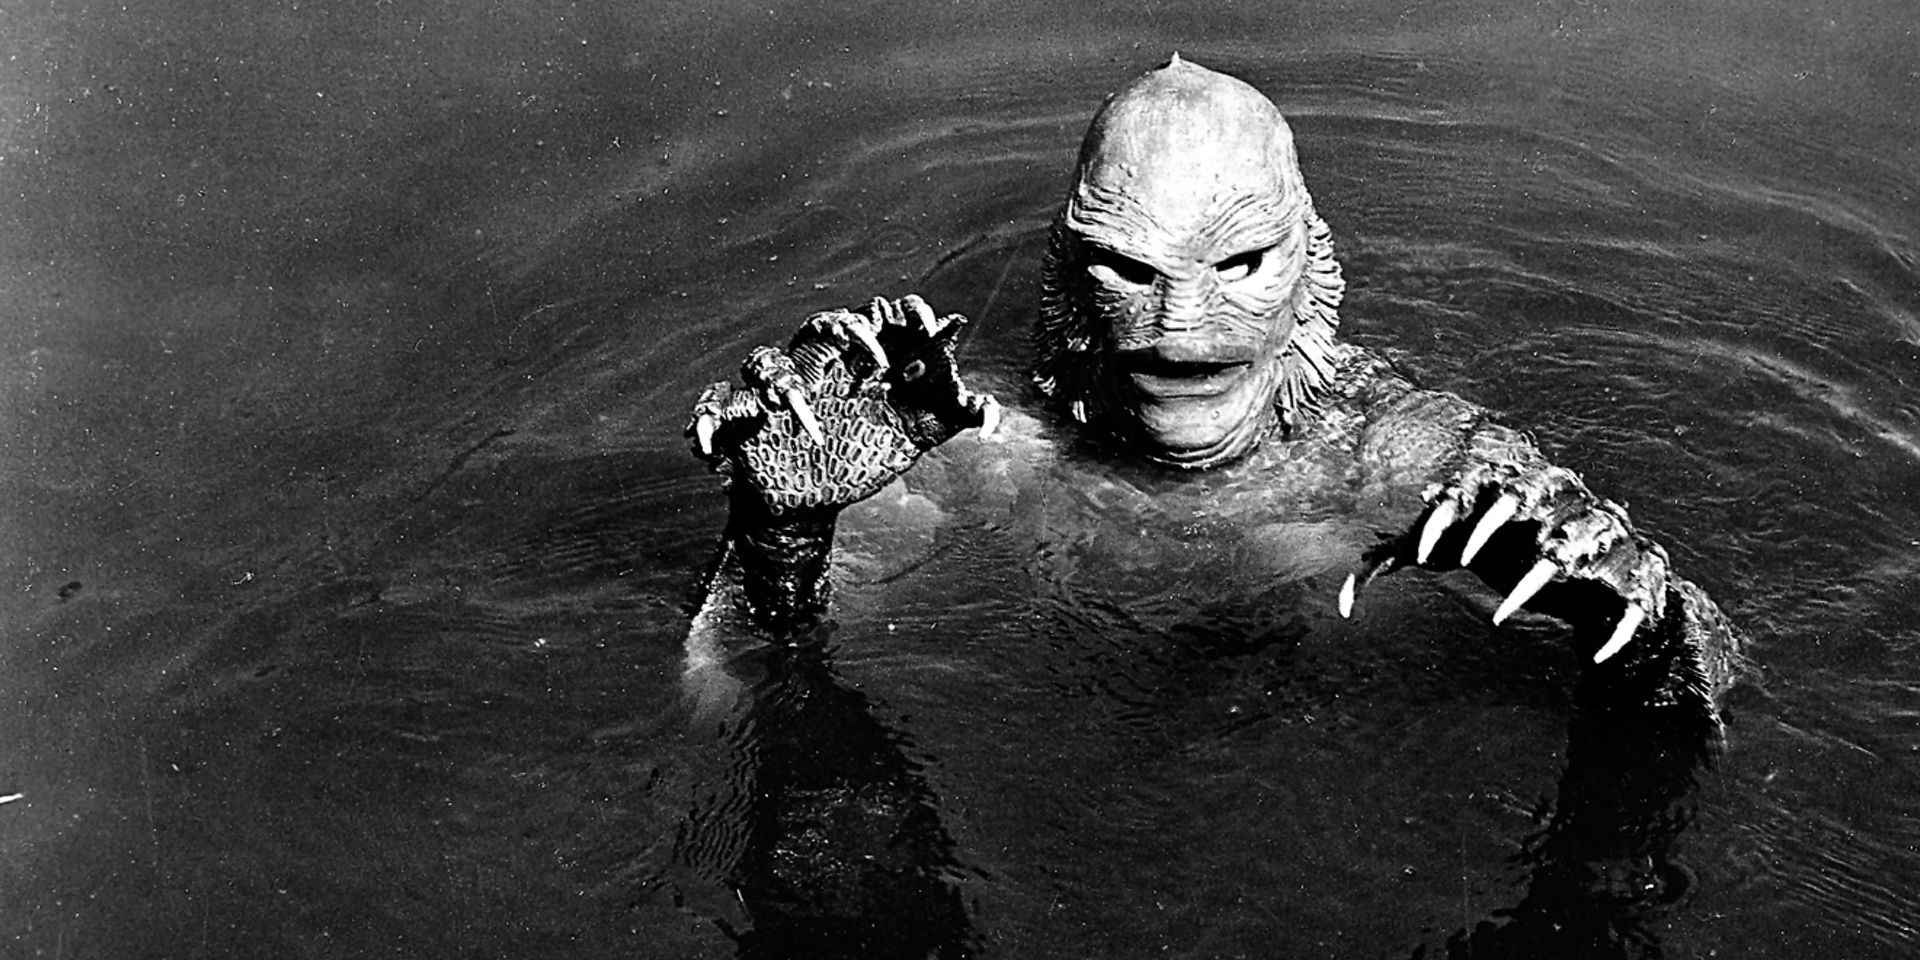 Gill-man in Creature from the Black Lagoon